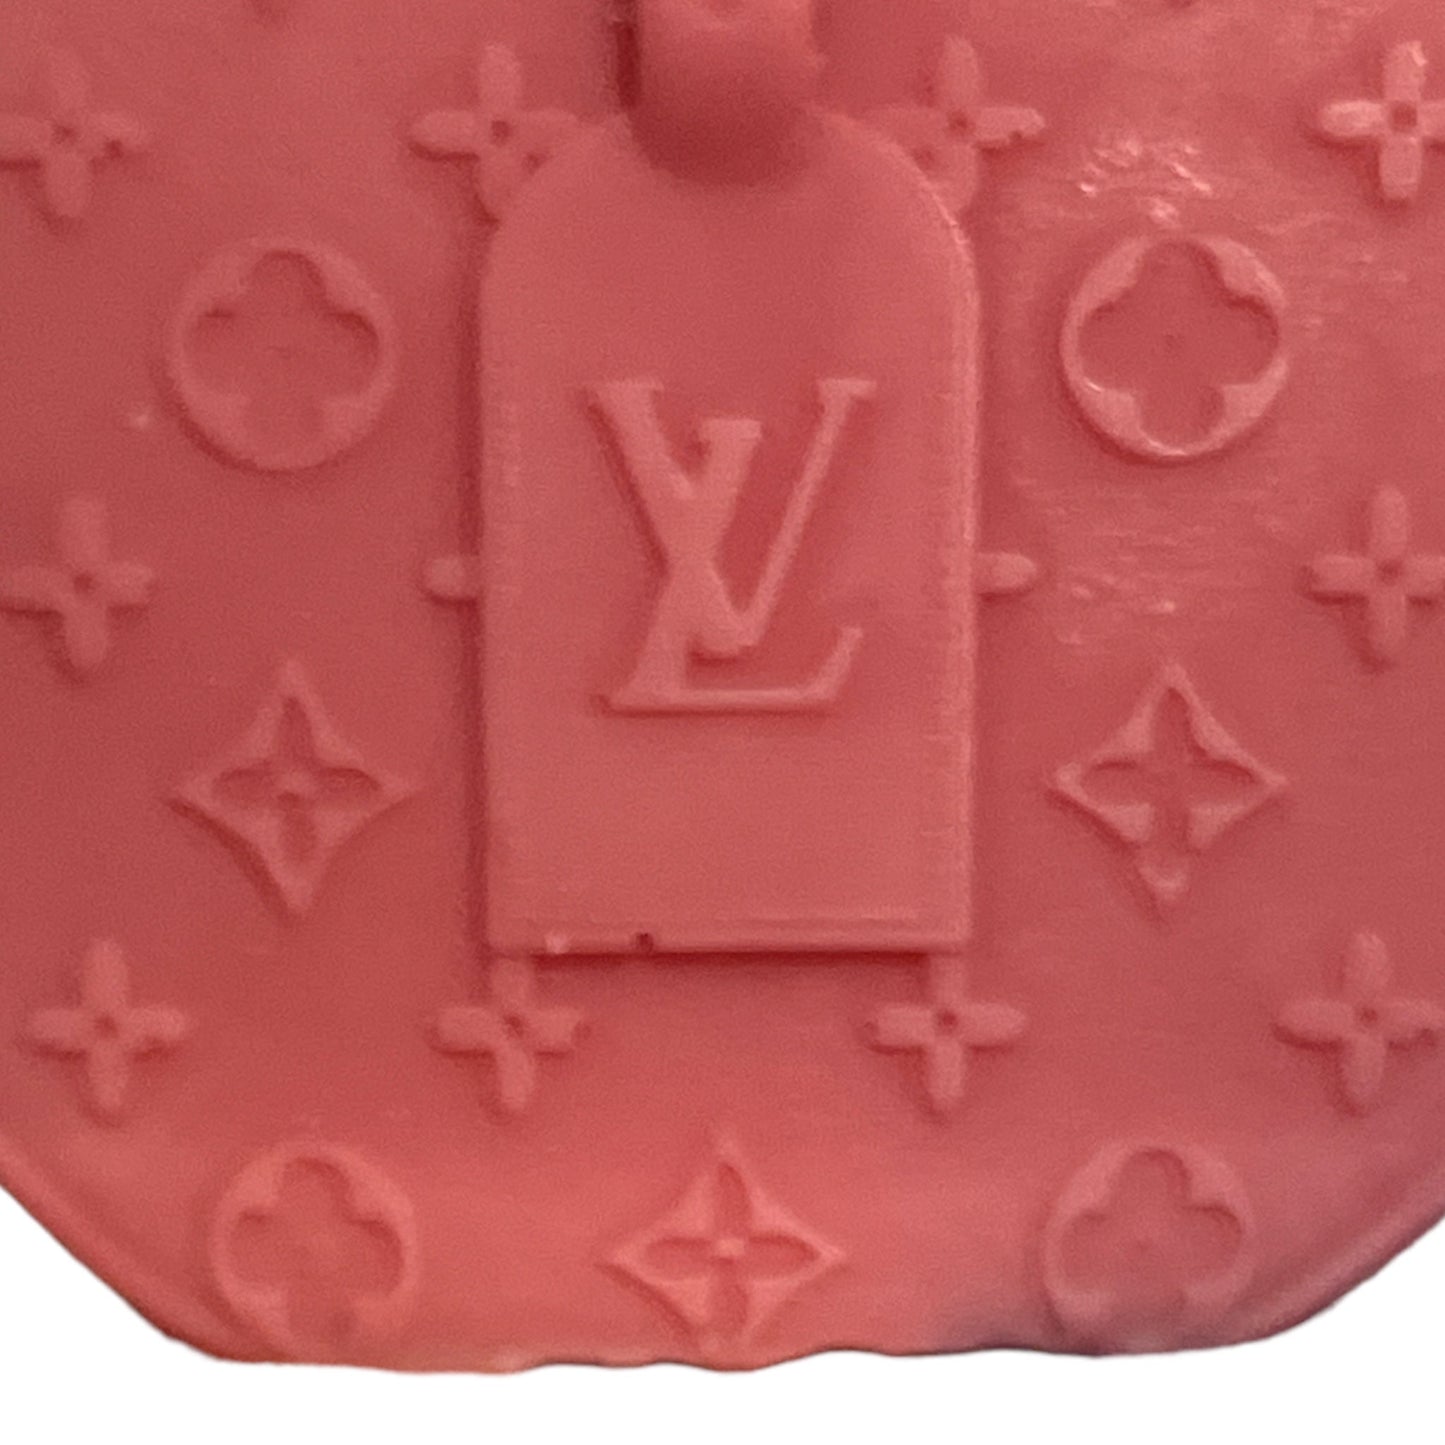 The LV Candle - Something about Sofia